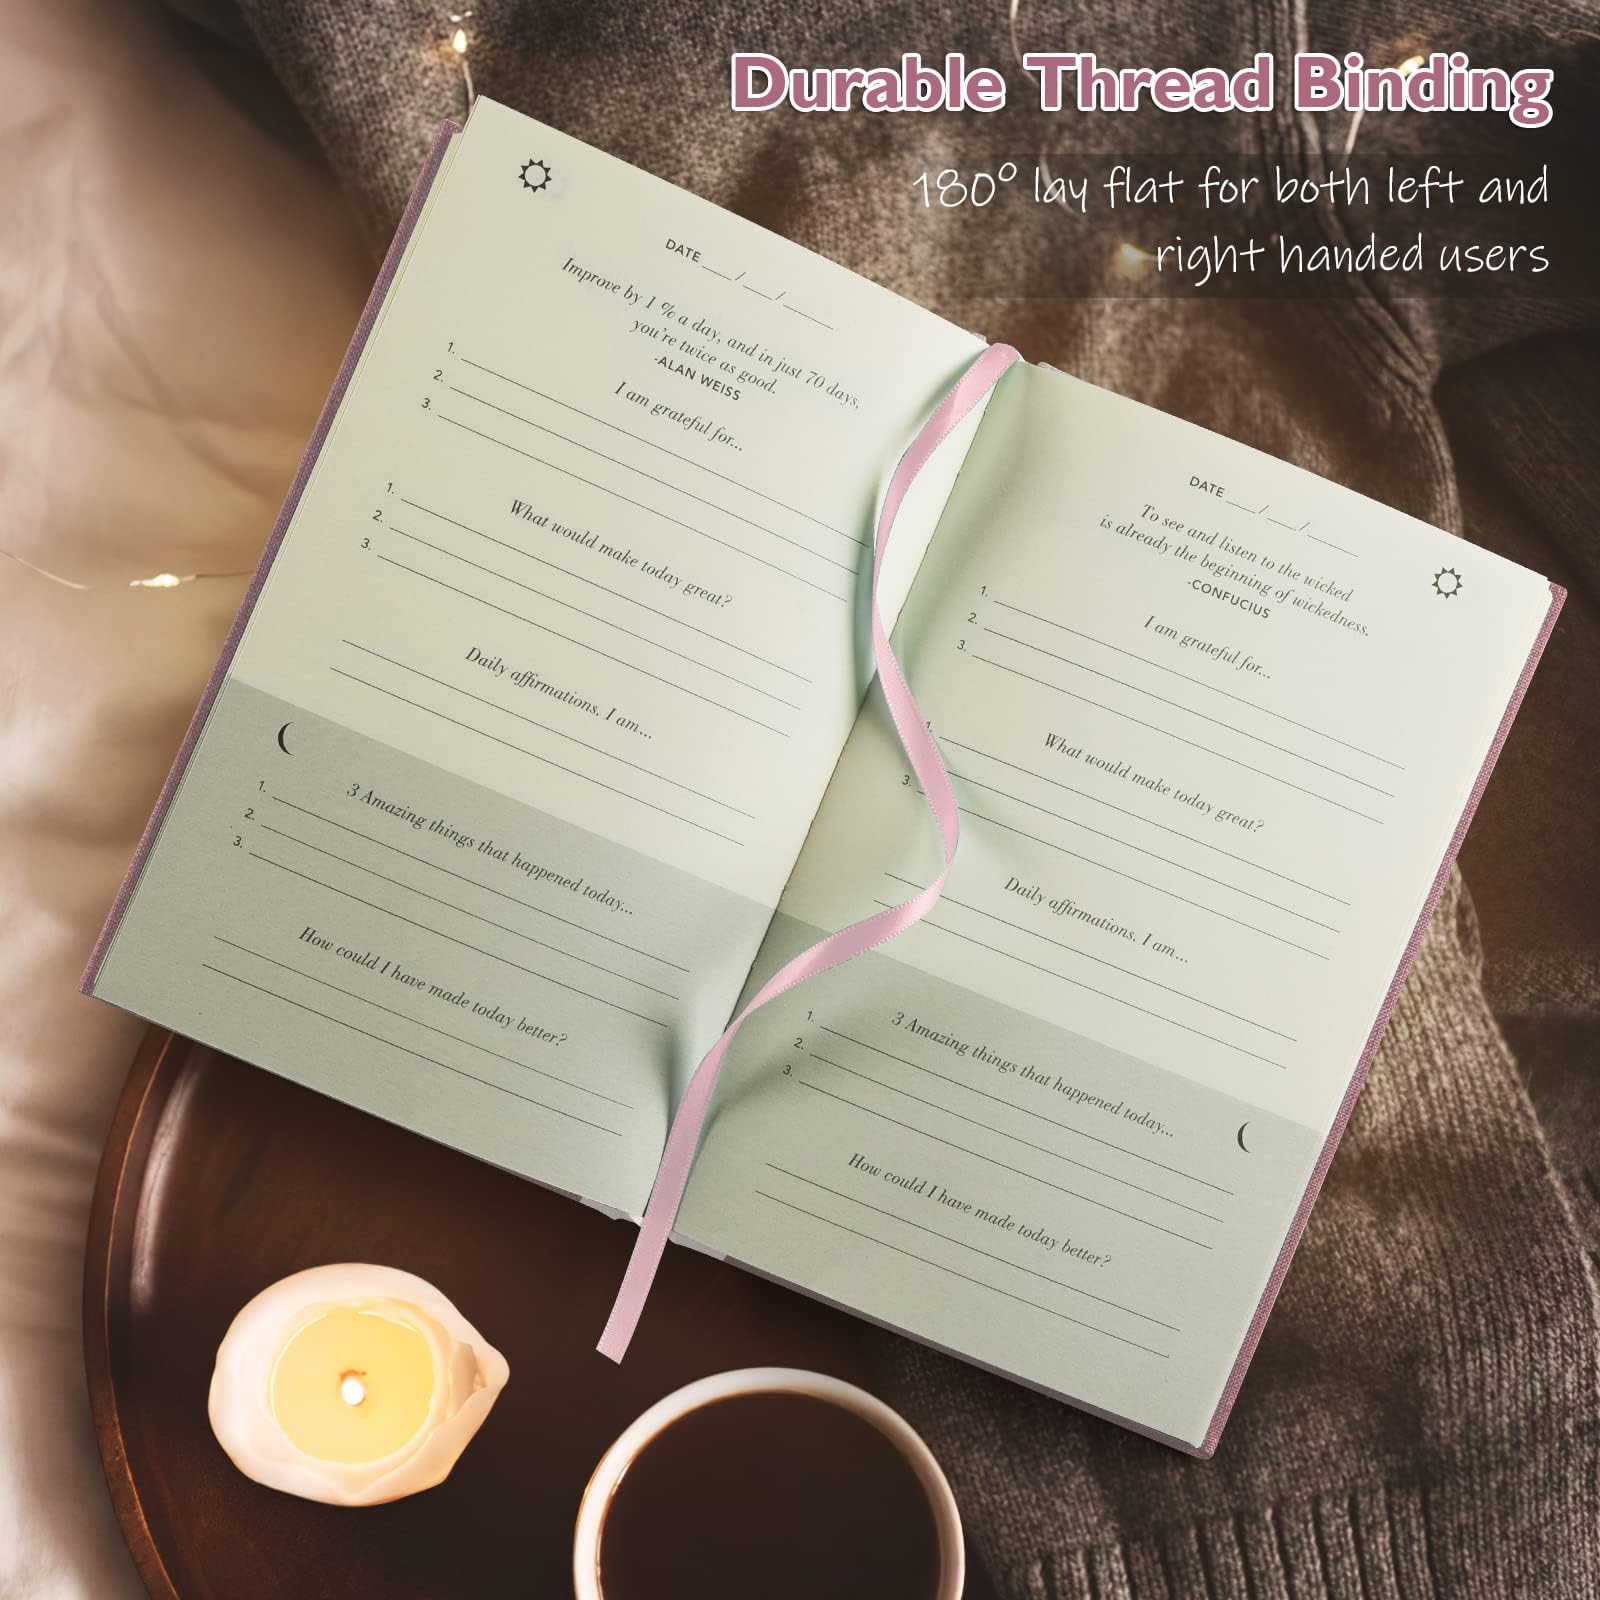 Gratitude Journal, a Few Minute Journal, Daily Gratitude Journal with Prompts for Affirmation, Happiness, Mindfulness, Positivity, Wellness, Undated Gratitude Journal for Women & Men(21.59*13.97cm)